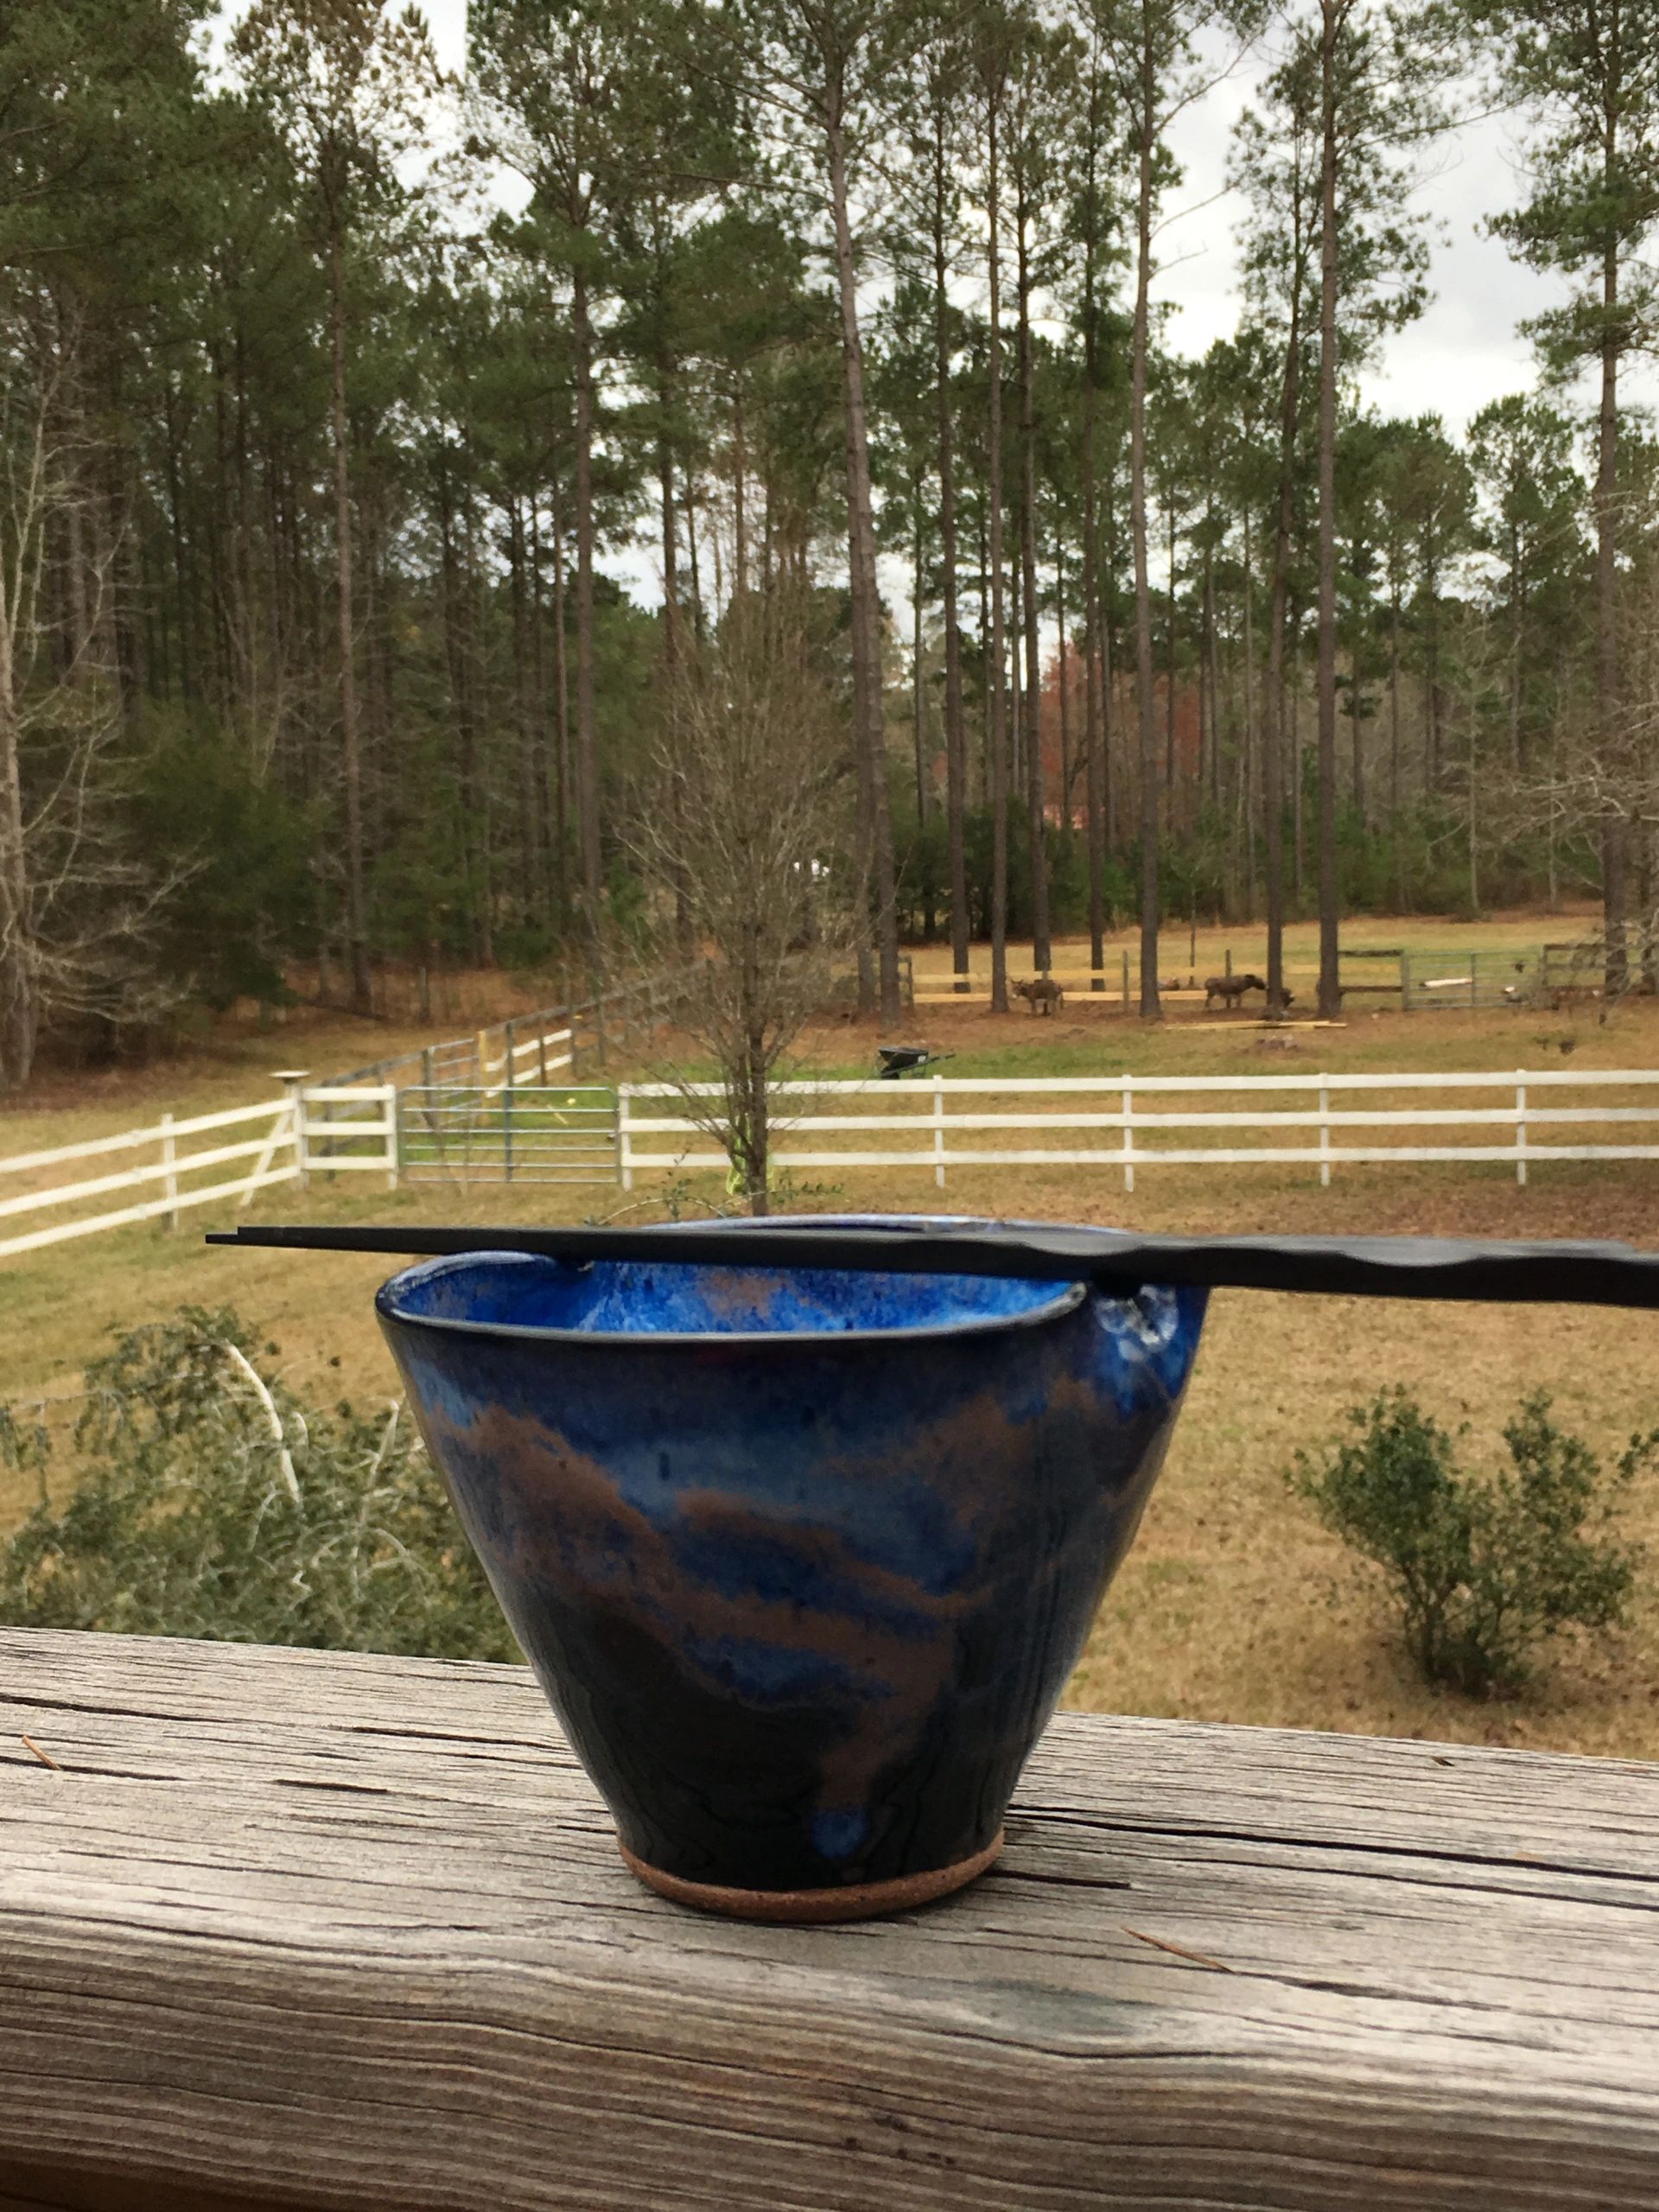 Gibson Branch Farm And Pottery